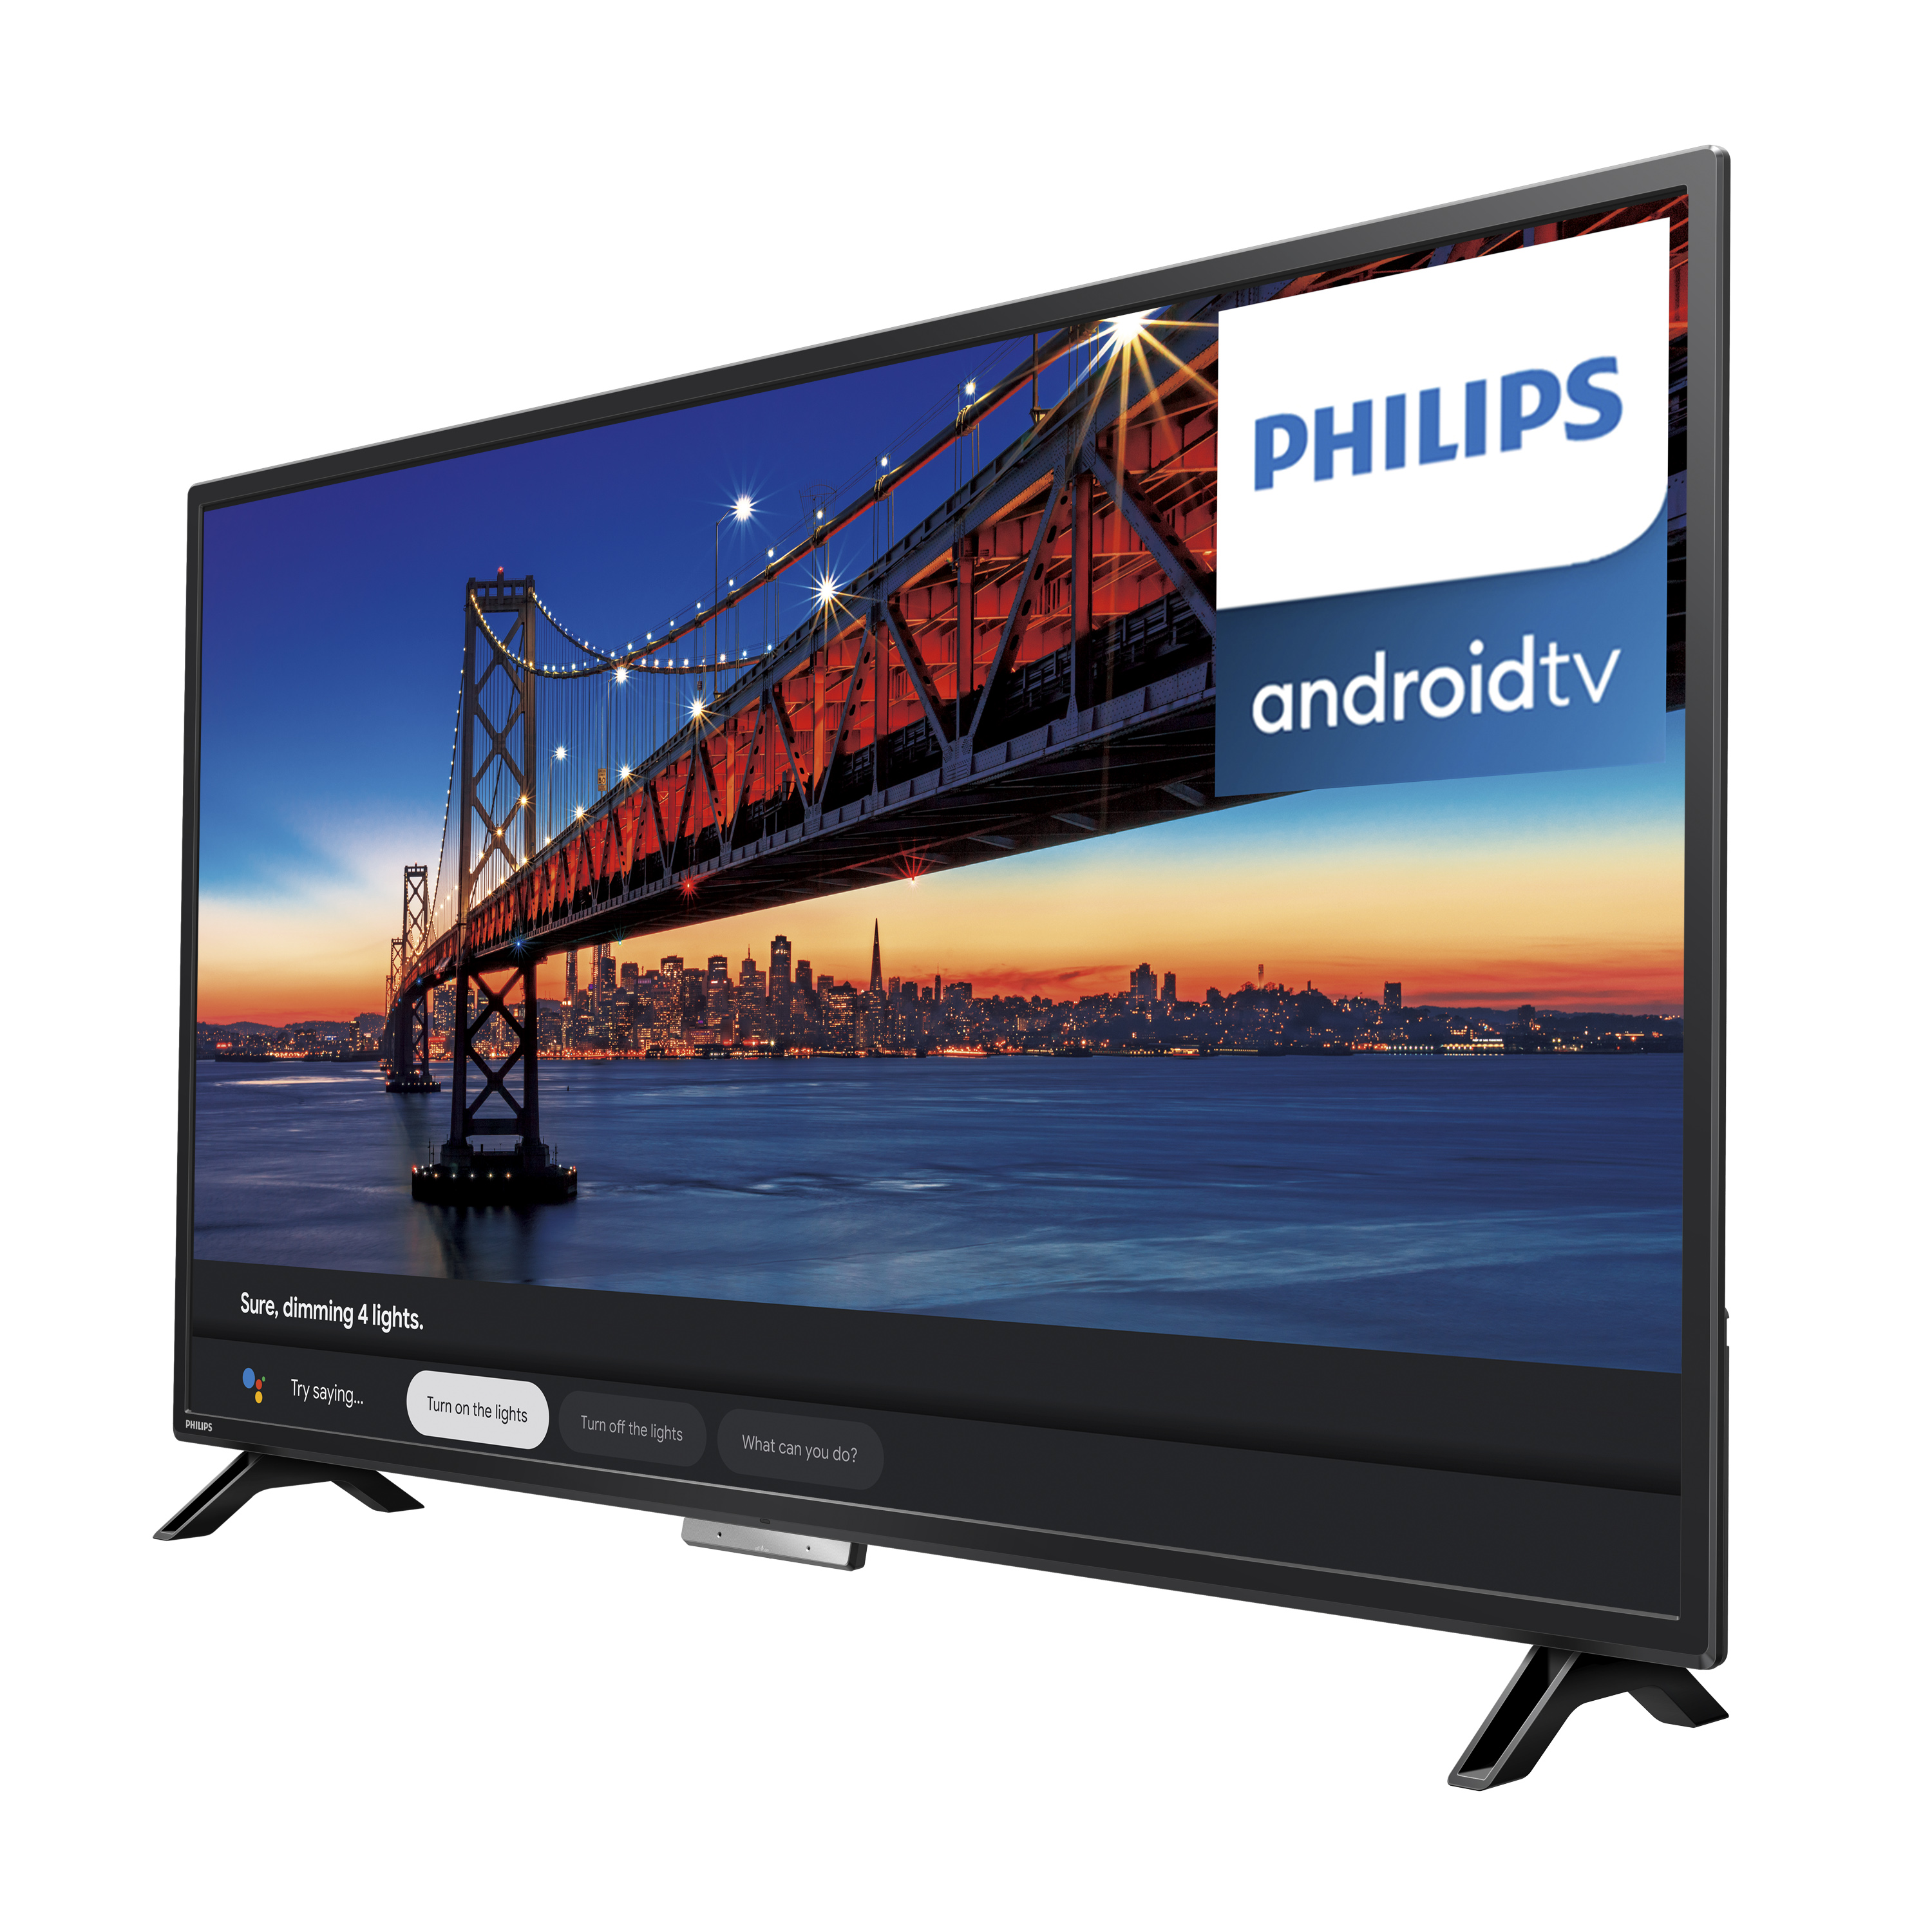 Philips 50" Class 4K Ultra HD (2160p) Android Smart TV with Handsfree Google Built-in (50PFL5806/F7) - image 3 of 19